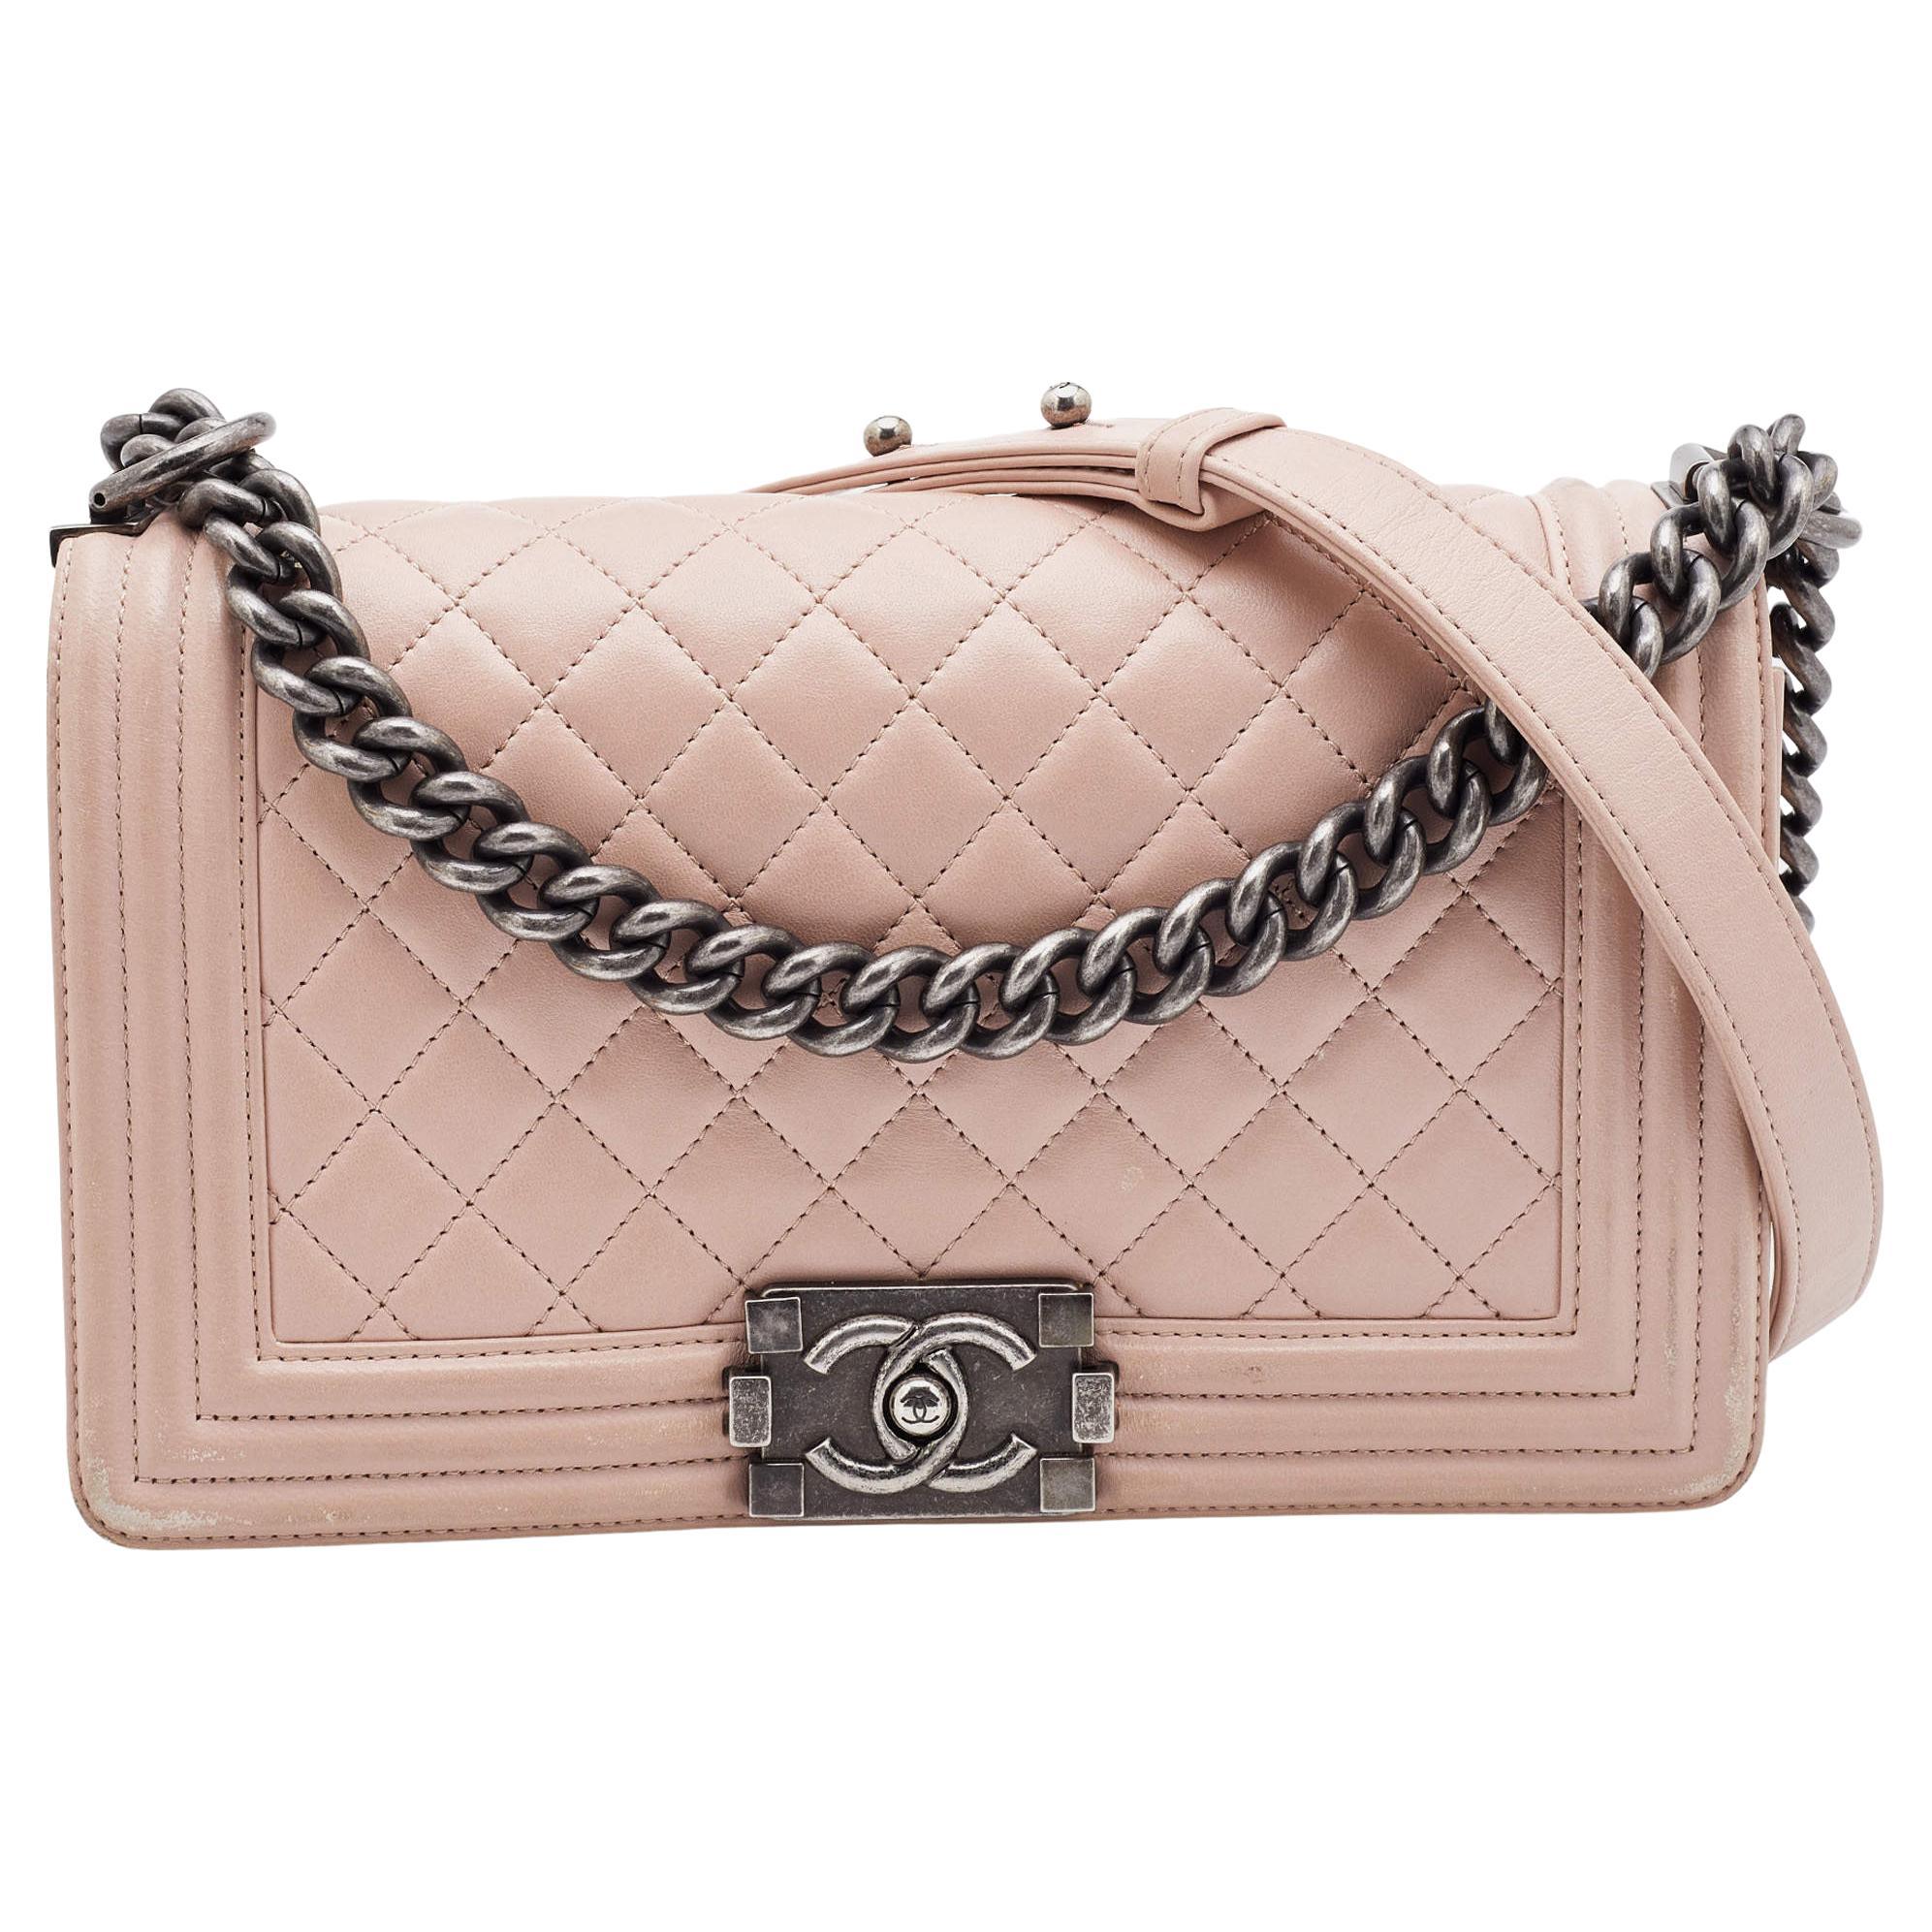 Chanel Beige Quilted Leather Medium Boy Flap Bag